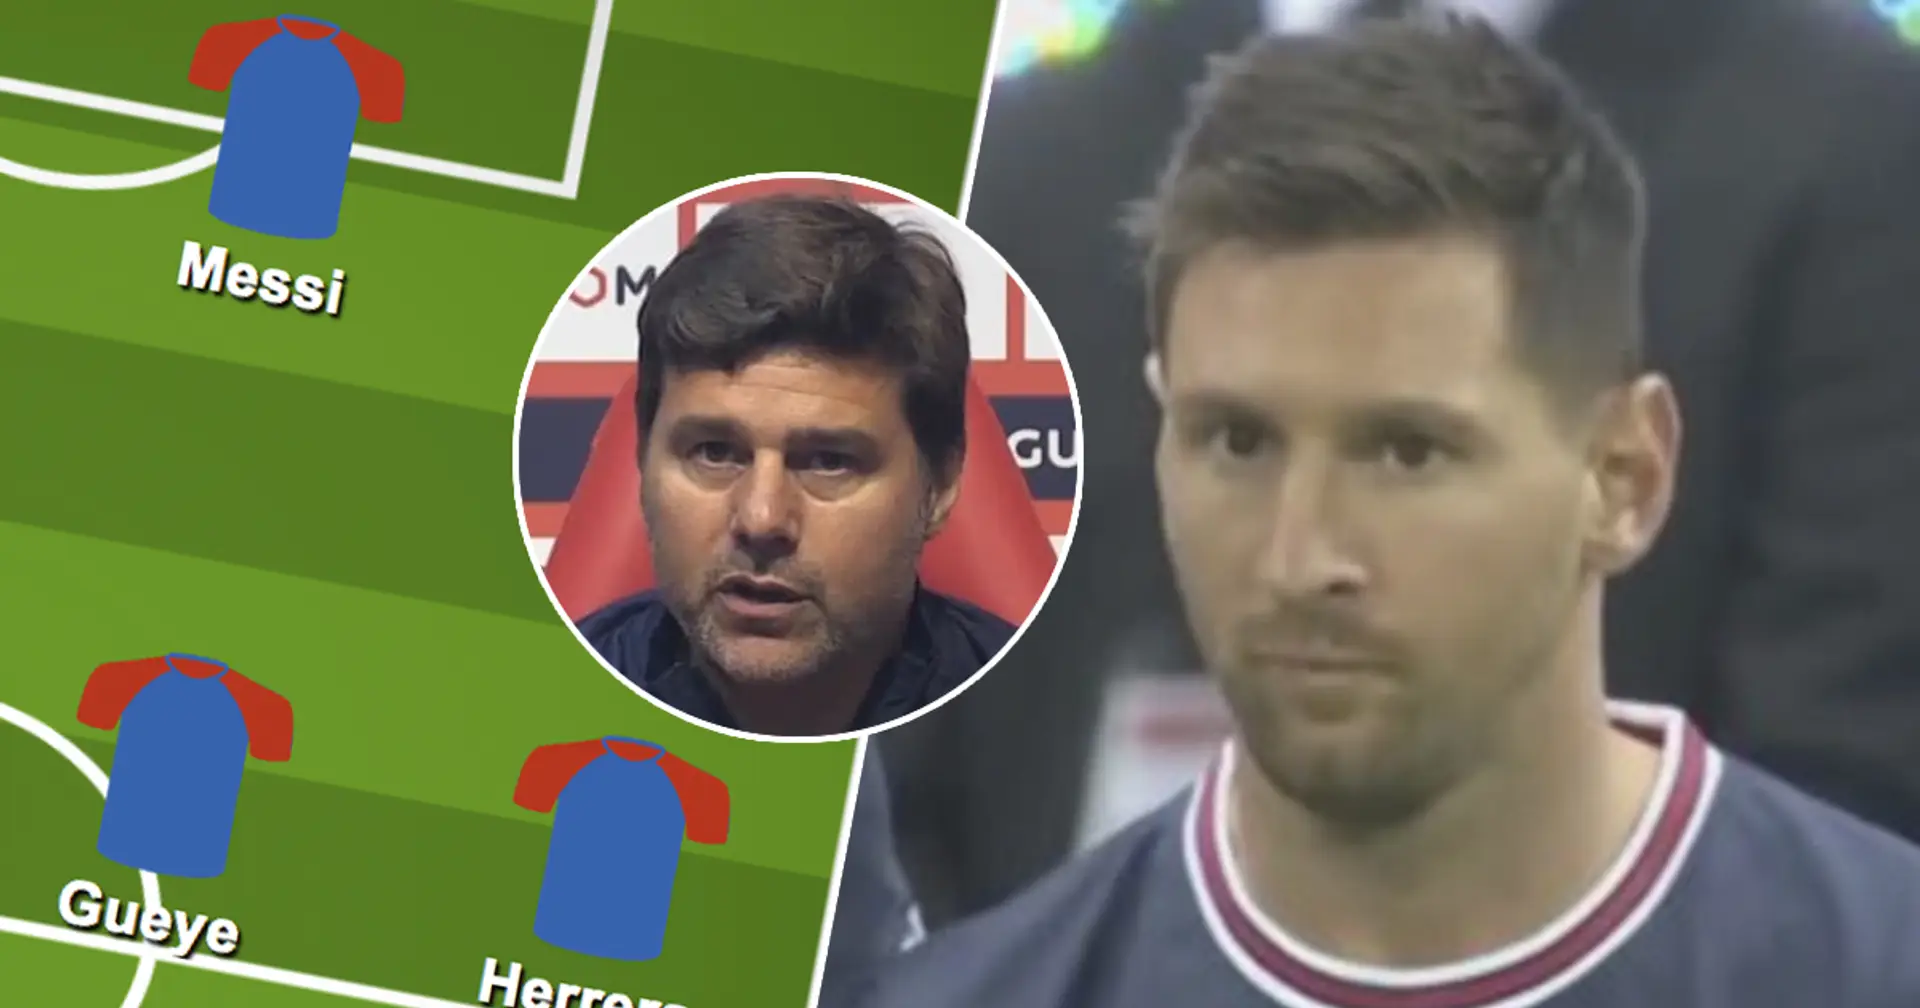 Messi in 'favourite' position and more: Pochettino's formation vs Reims unveiled